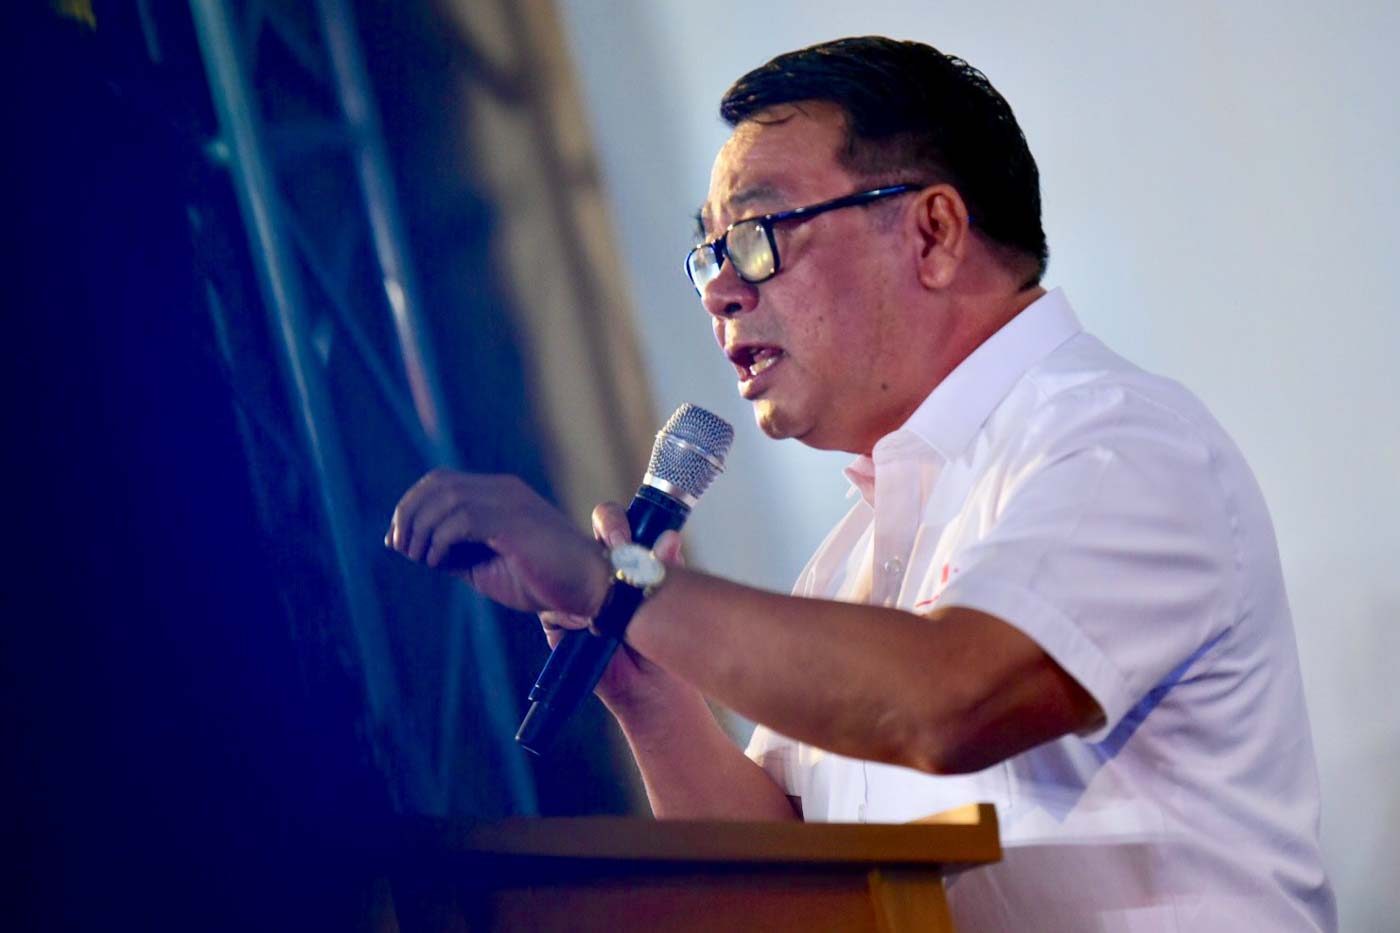 Go after syndicates, not children in conflict with the law – Colmenares